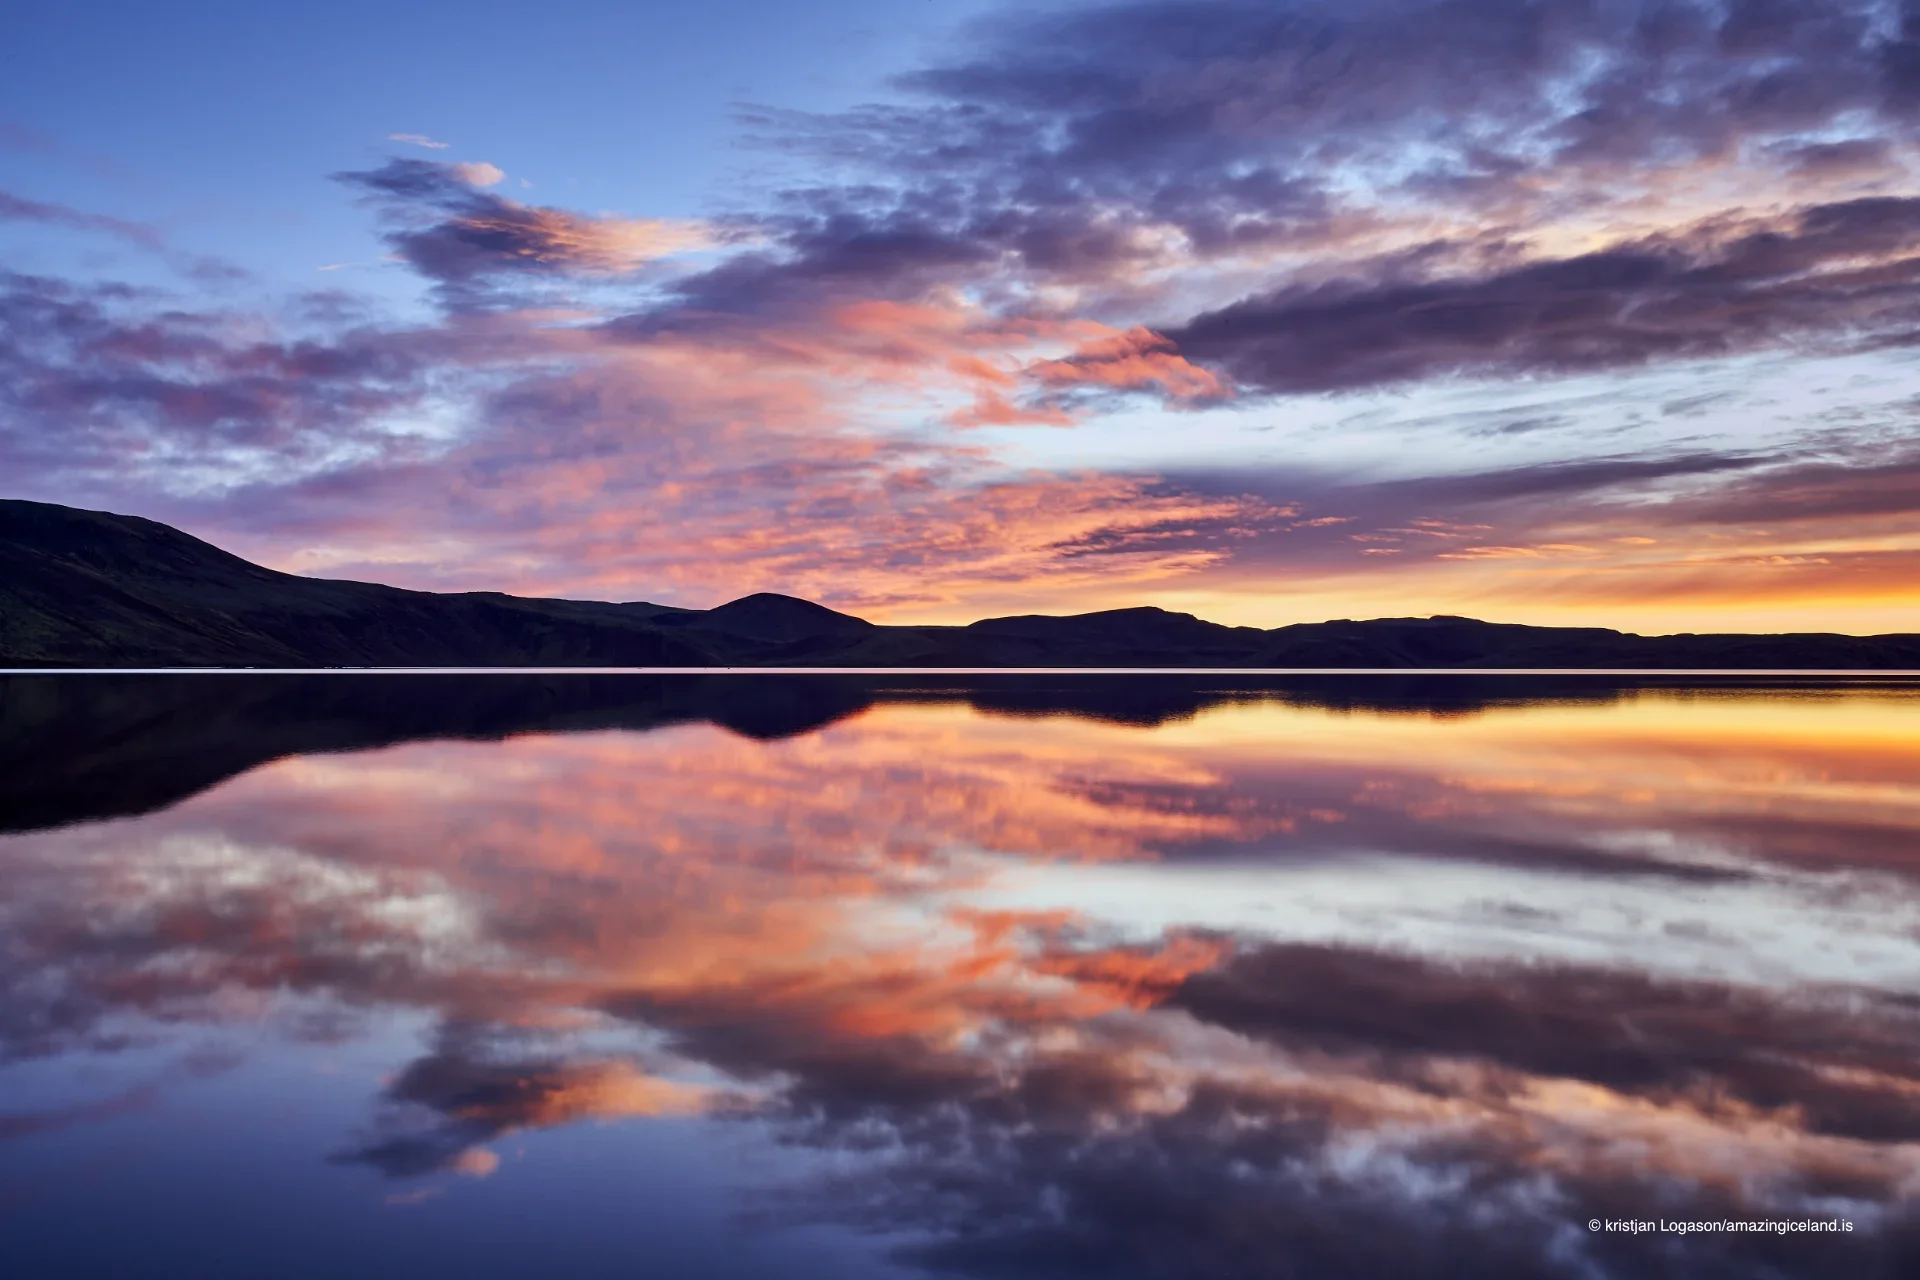 Reflection of a colorful sunset on Lake Kleifarvatn in Reykjanes peninsula in Iceland